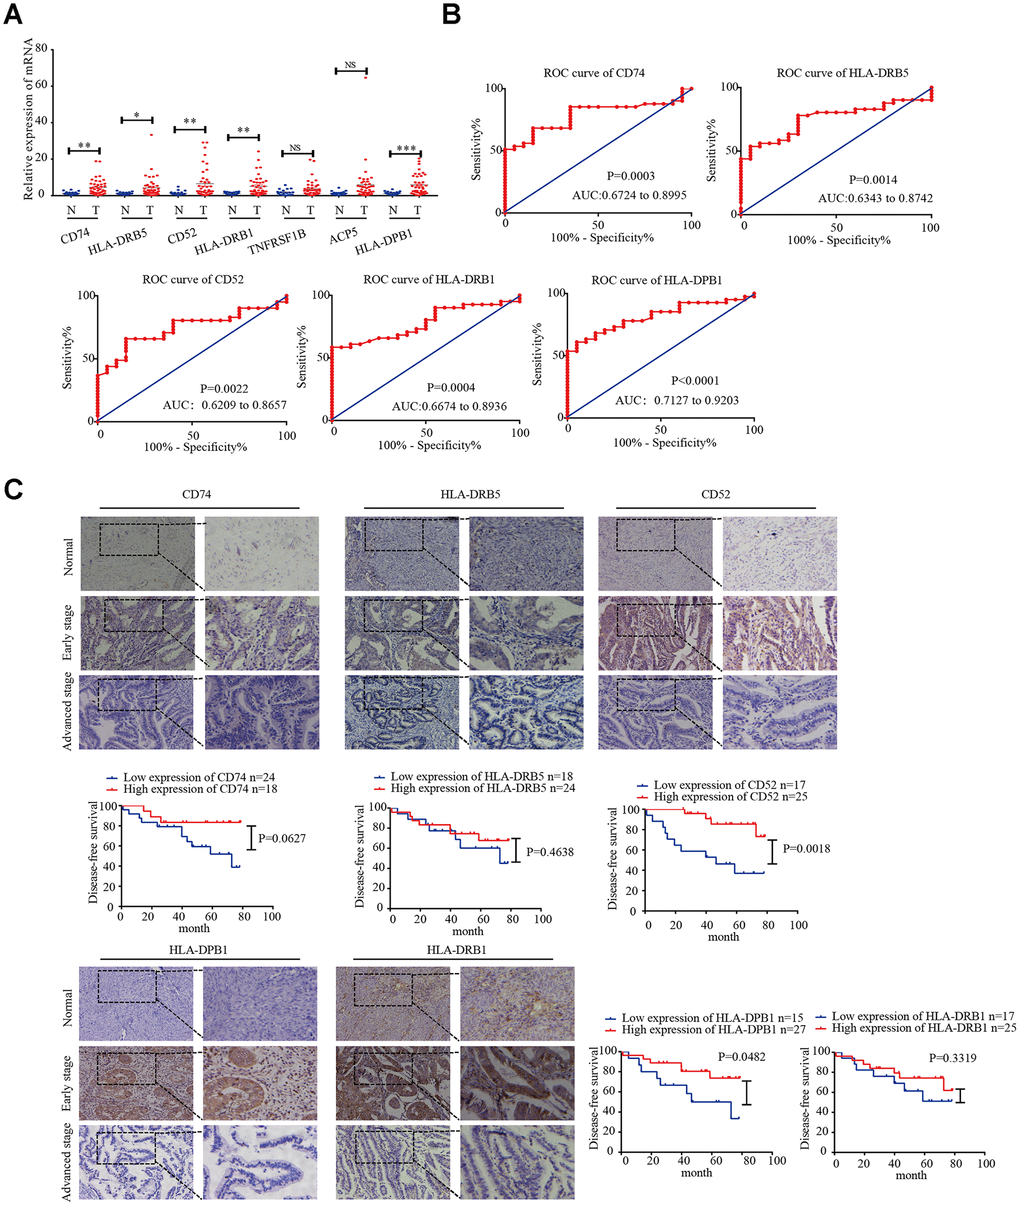 CD74, HLA-DRB5, CD52, HLA-DPB1, and HLA-DRB1 in the microenvironment of related prognostic markers in endometrial cancer. (A) Expression of CD74, HLA-DRB5, CD52, HLA-DPB1, HLA-DRB1, TNFRSF1B, and ACP5 in 41 endometrial cancer tissues and 20 normal tissues was determined by qRT-PCR. (B) ROC curve of 5 msicroenvironment-related prognostic signature. (C) Expression of CD74, HLA-DRB5, CD52, HLA-DPB1 and HLA-DRB1 was detected by immunohistochemistry in endometrial cancer (n = 42) and normal endometrial tissue (n = 20). Disease-free survival curves for CD74, HLA-DRB5, CD52, HLA-DPB1 and HLA-DRB1 in 42 endometrial carcinoma cases. *P P P 